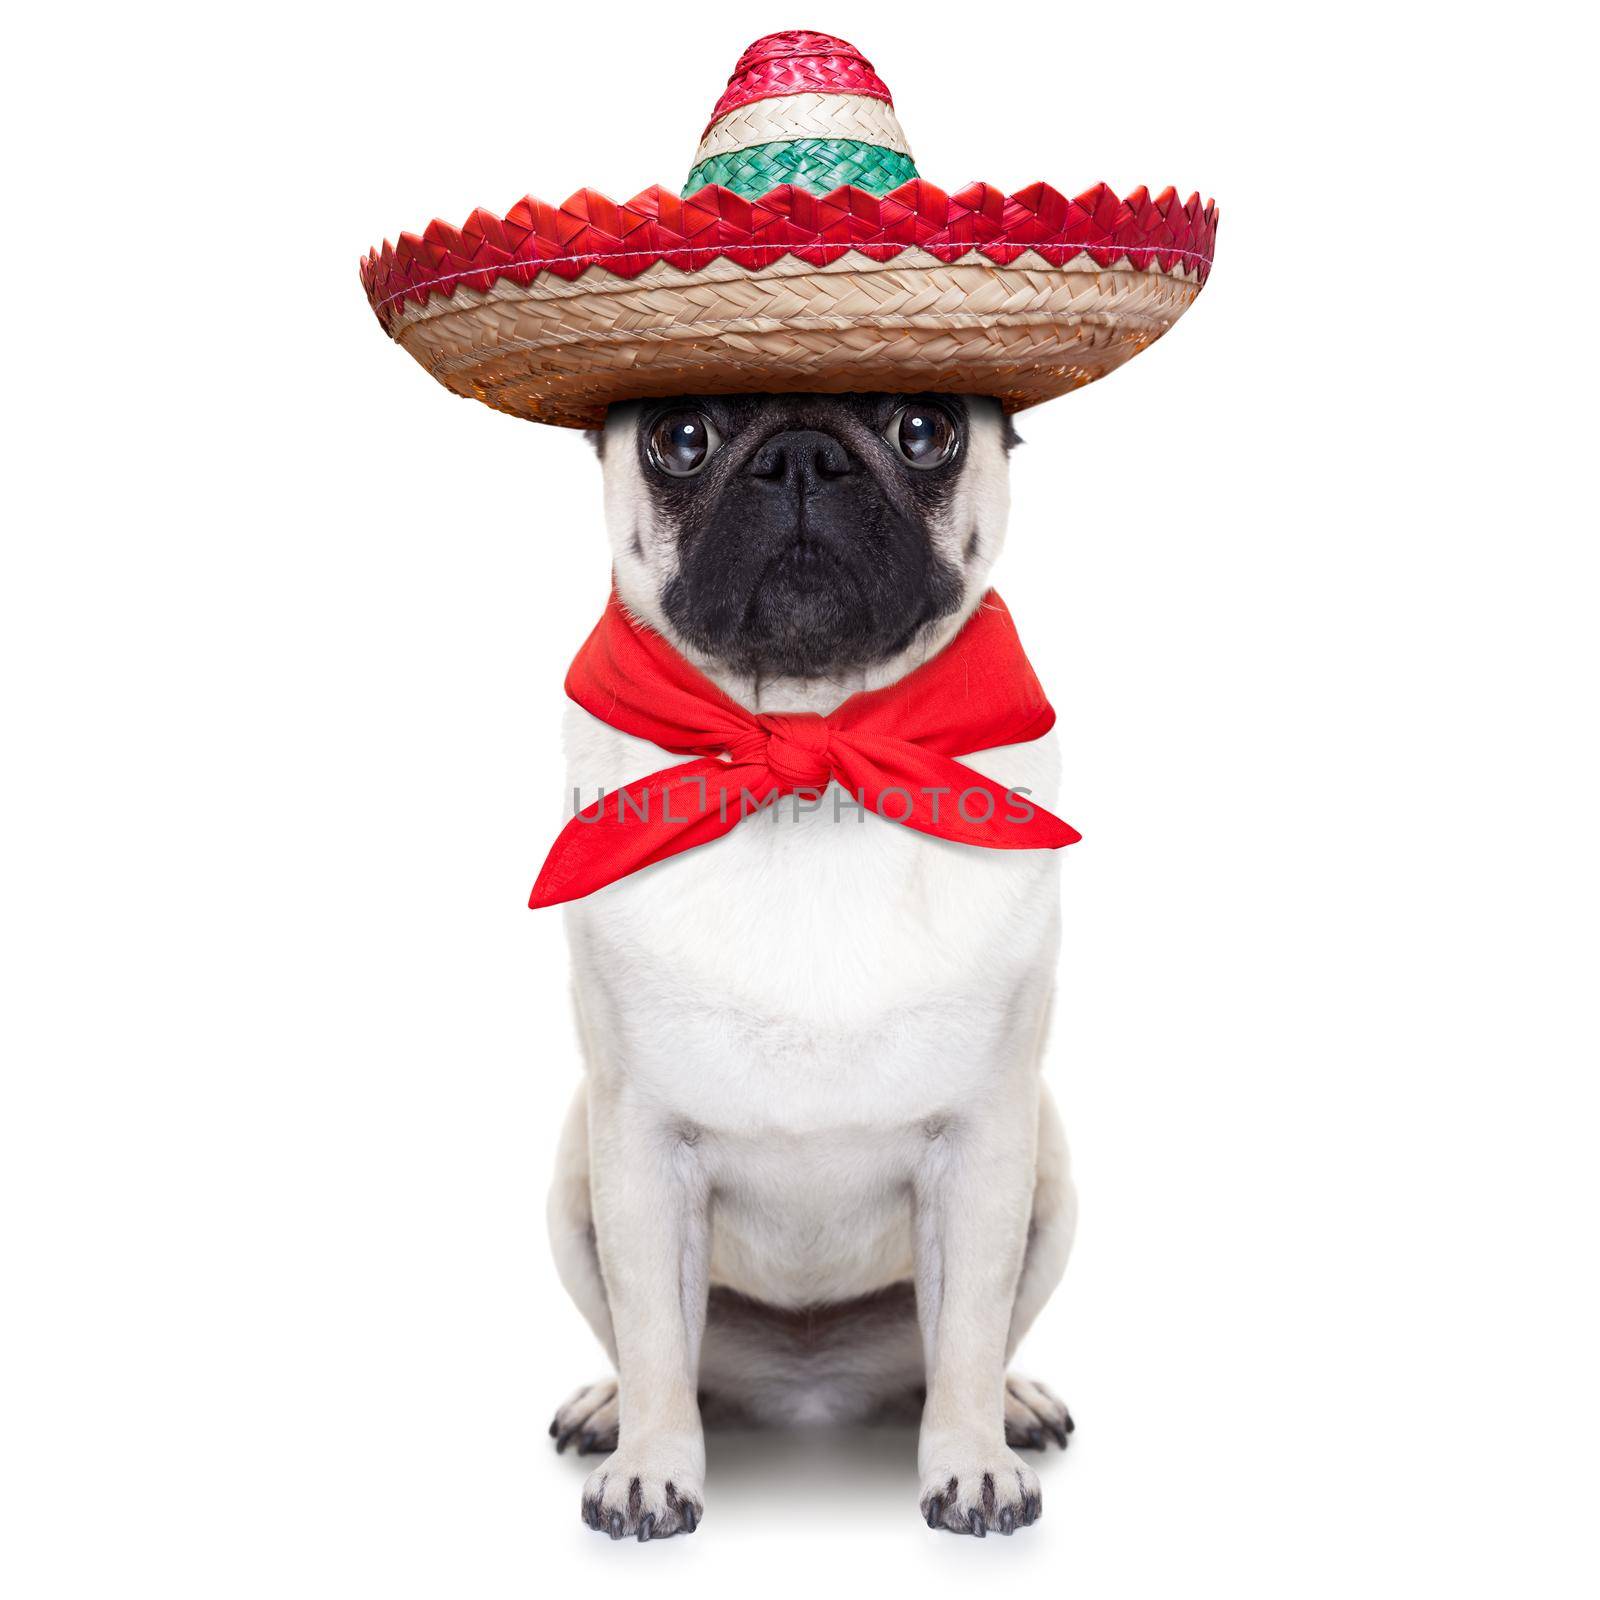 mexican dog by Brosch